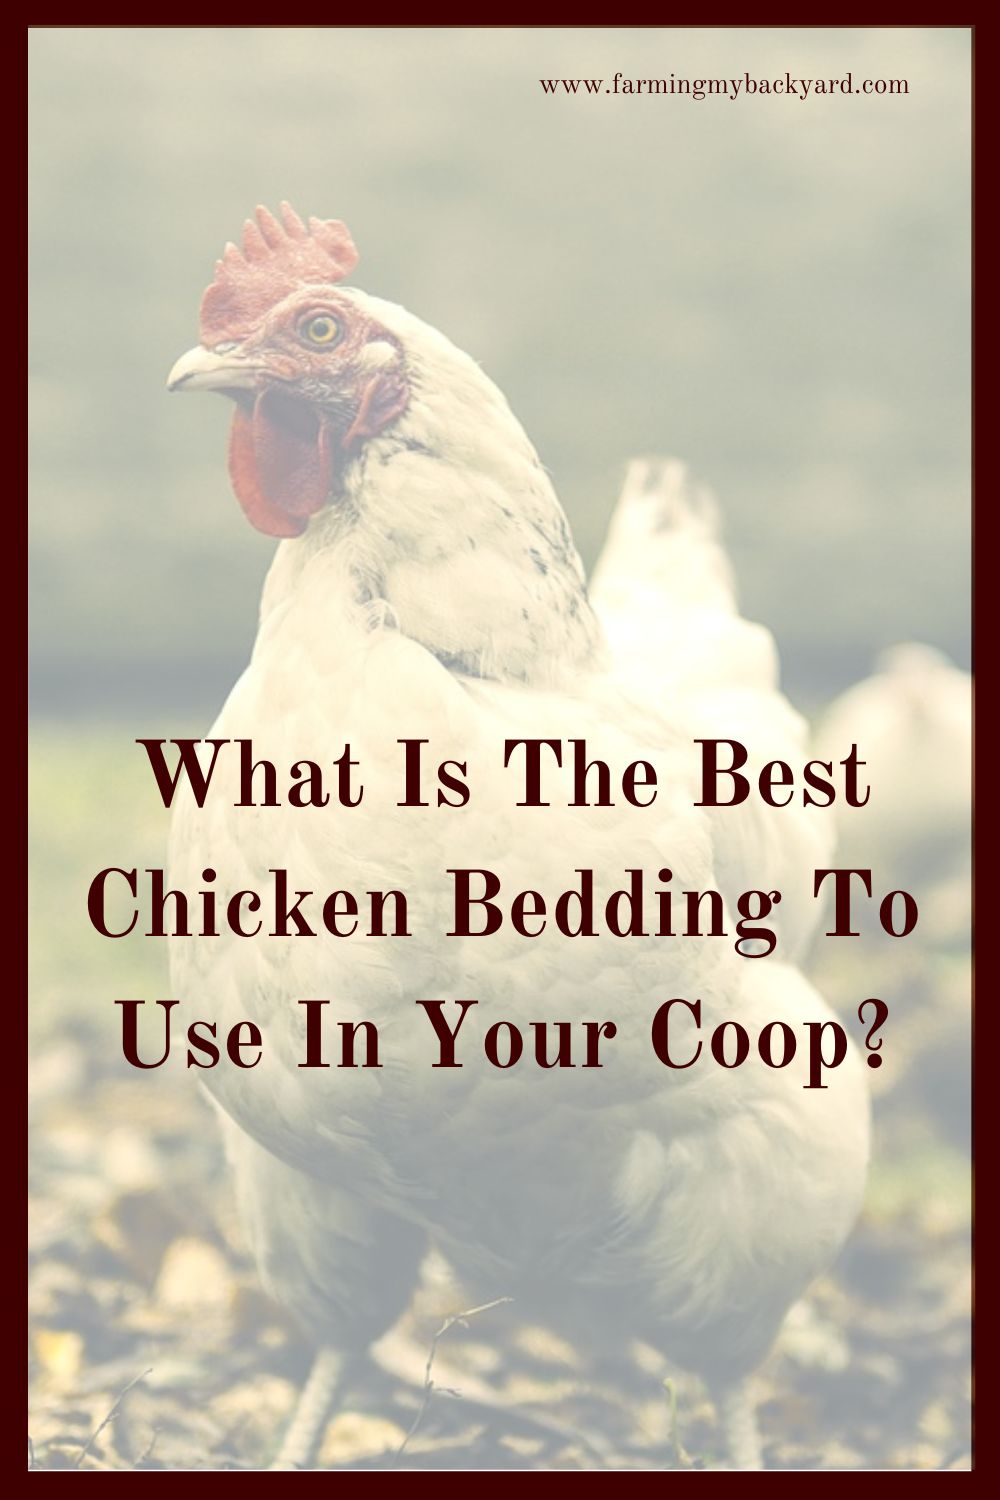 One of the inescapable facts of keeping chickens is that they produce waste.  Here's how to find the best chicken bedding for your coop!